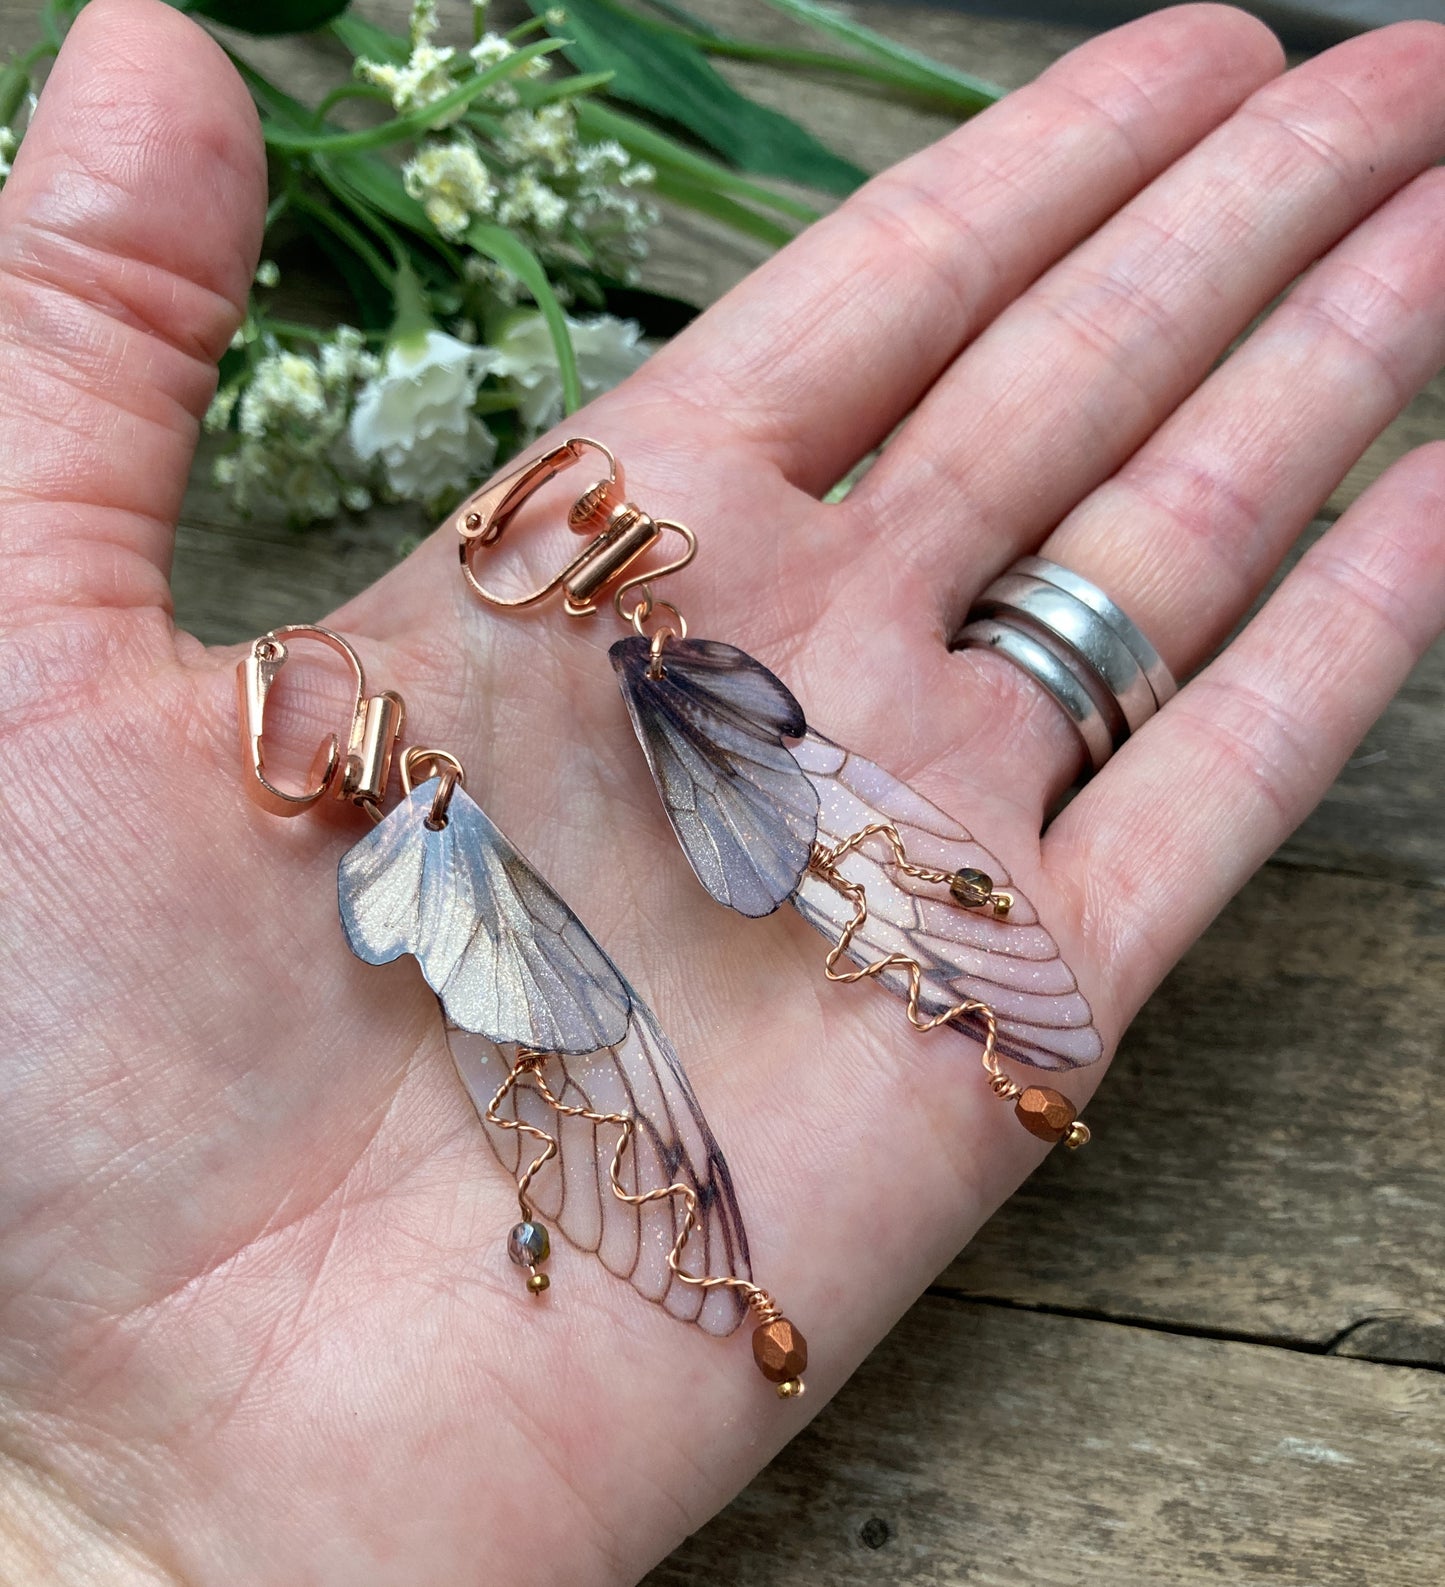 Fairy wing earrings with copper wired crystals with clip on components held in a hand